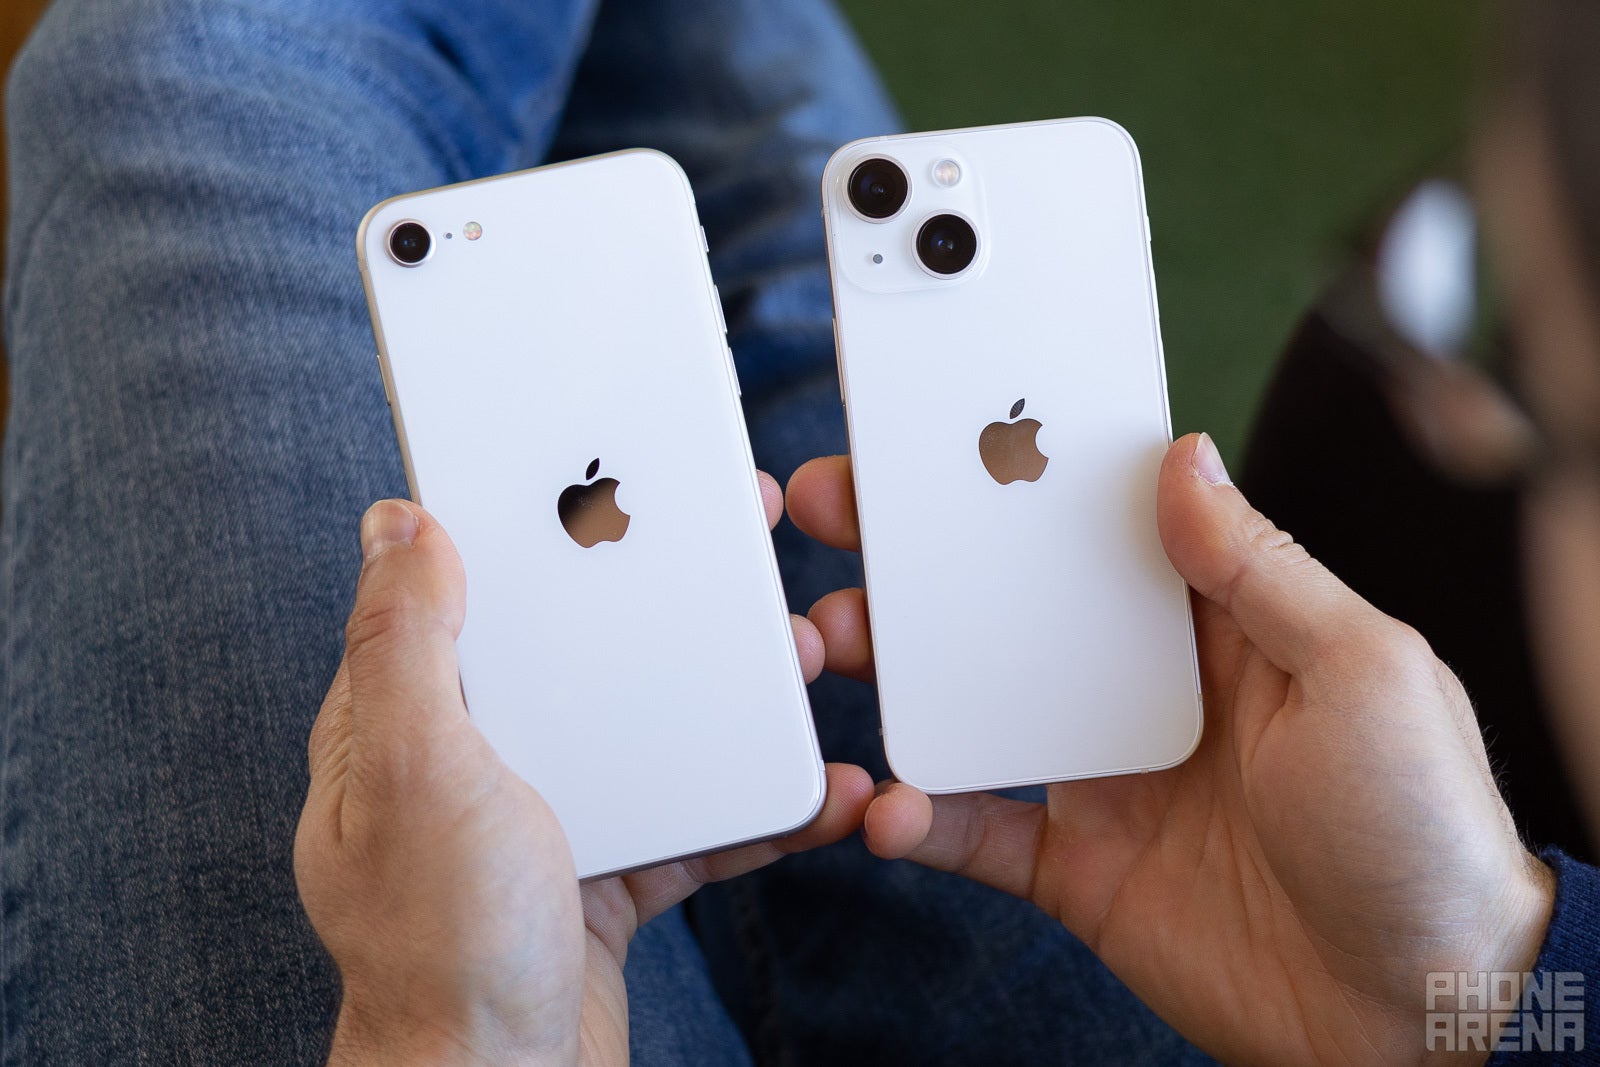 Left - iPhone SE 3rd gen; Right - iPhone 13 mini - Prediction: the iPhone mini is not dead, it will rise from the ashes